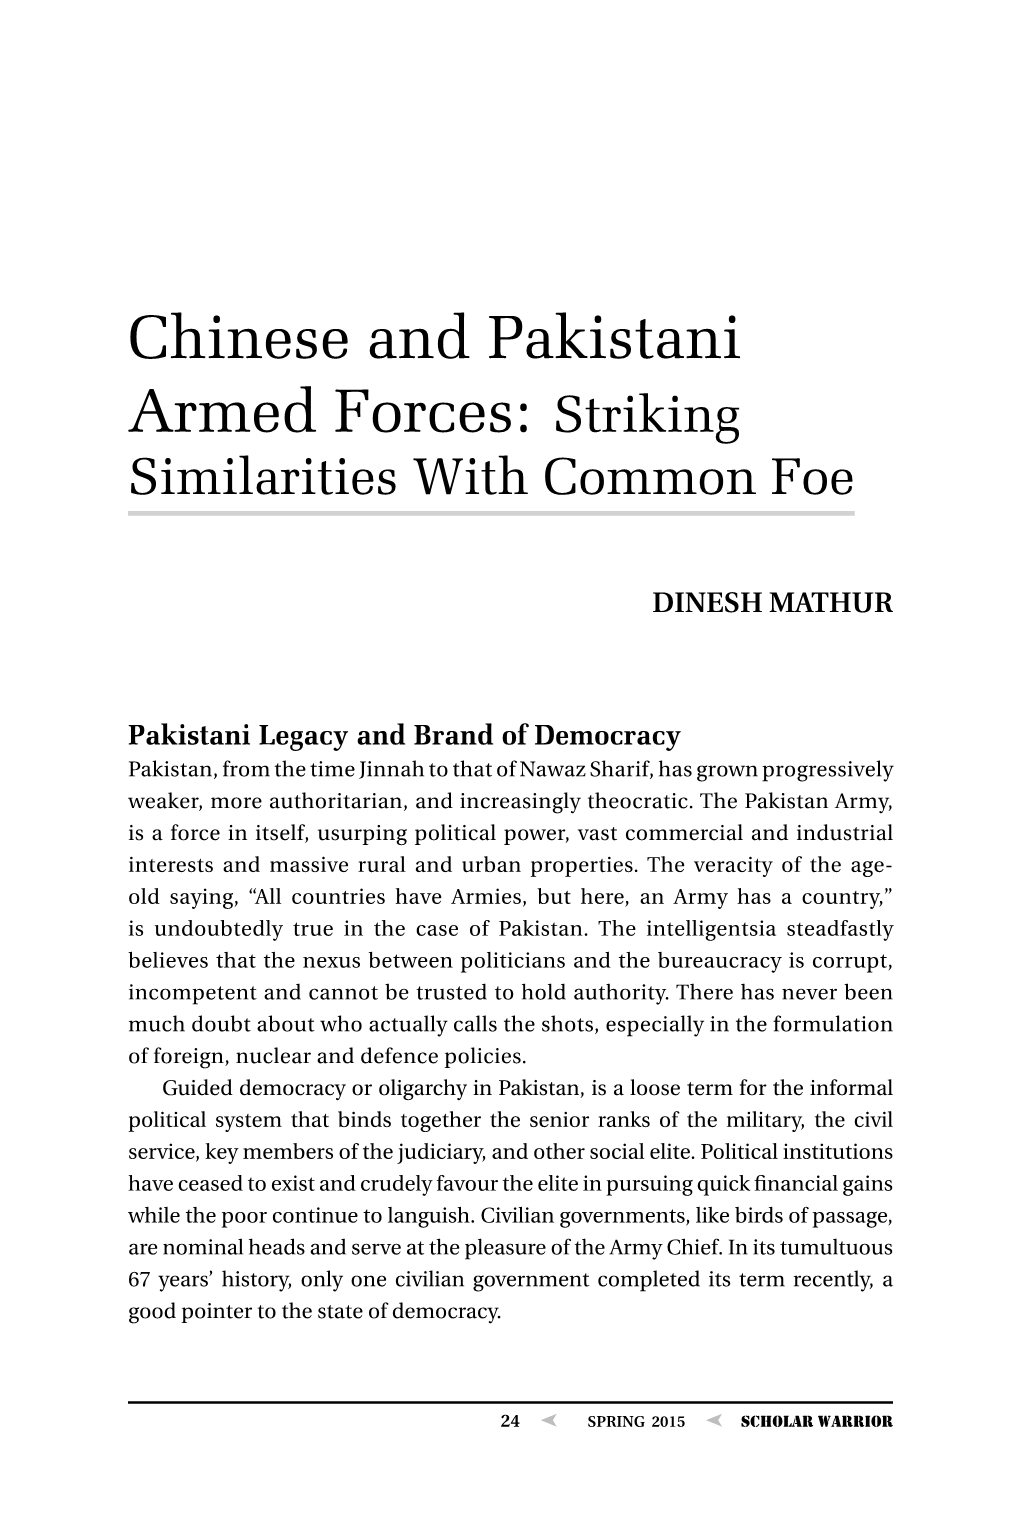 Chinese and Pakistani Armed Forces: Striking Similarities with Common Foe